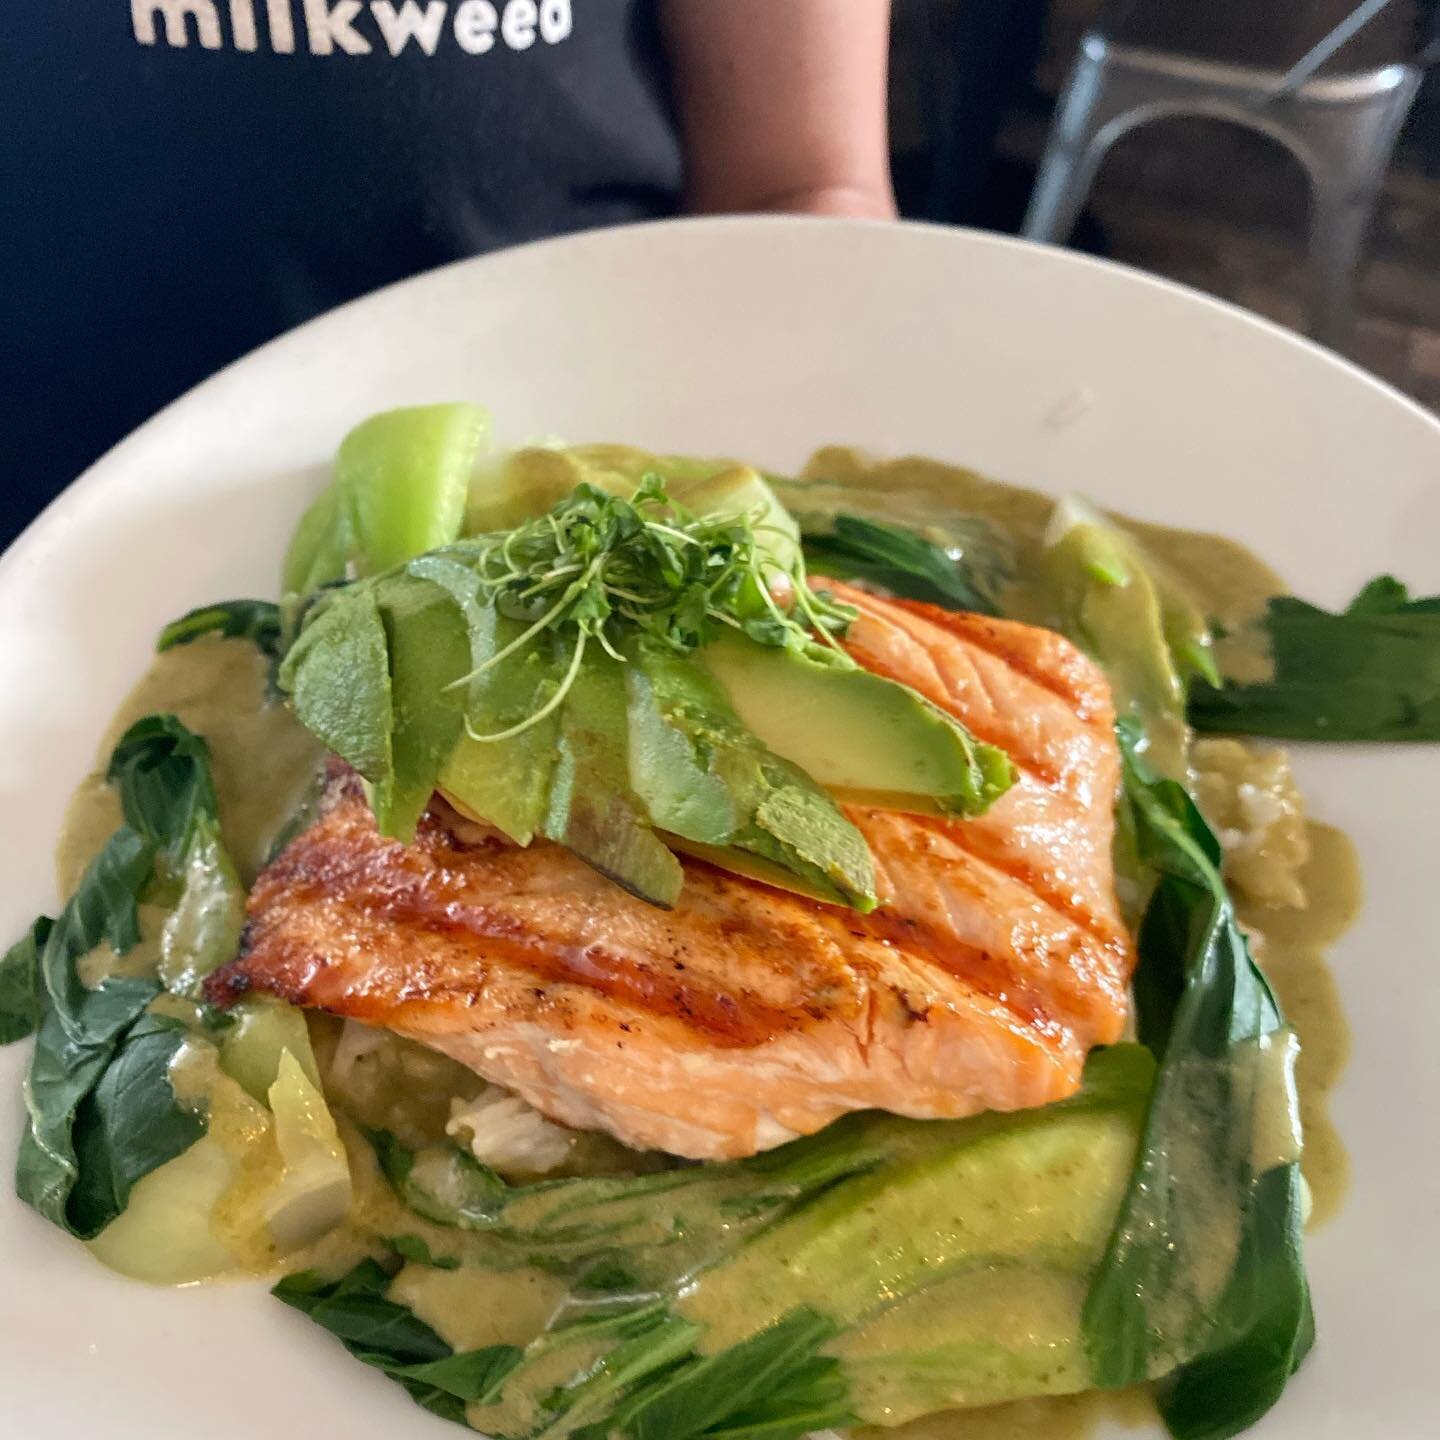 Salmon with green thai curry

While we ❤️ being one of your breakfast spots, some people just don&rsquo;t know how delicious our dinner entrees are!

Dinner starts at 5 pm and we take reservations for our dinner service.
#eatlocal #eatfresh #salmon